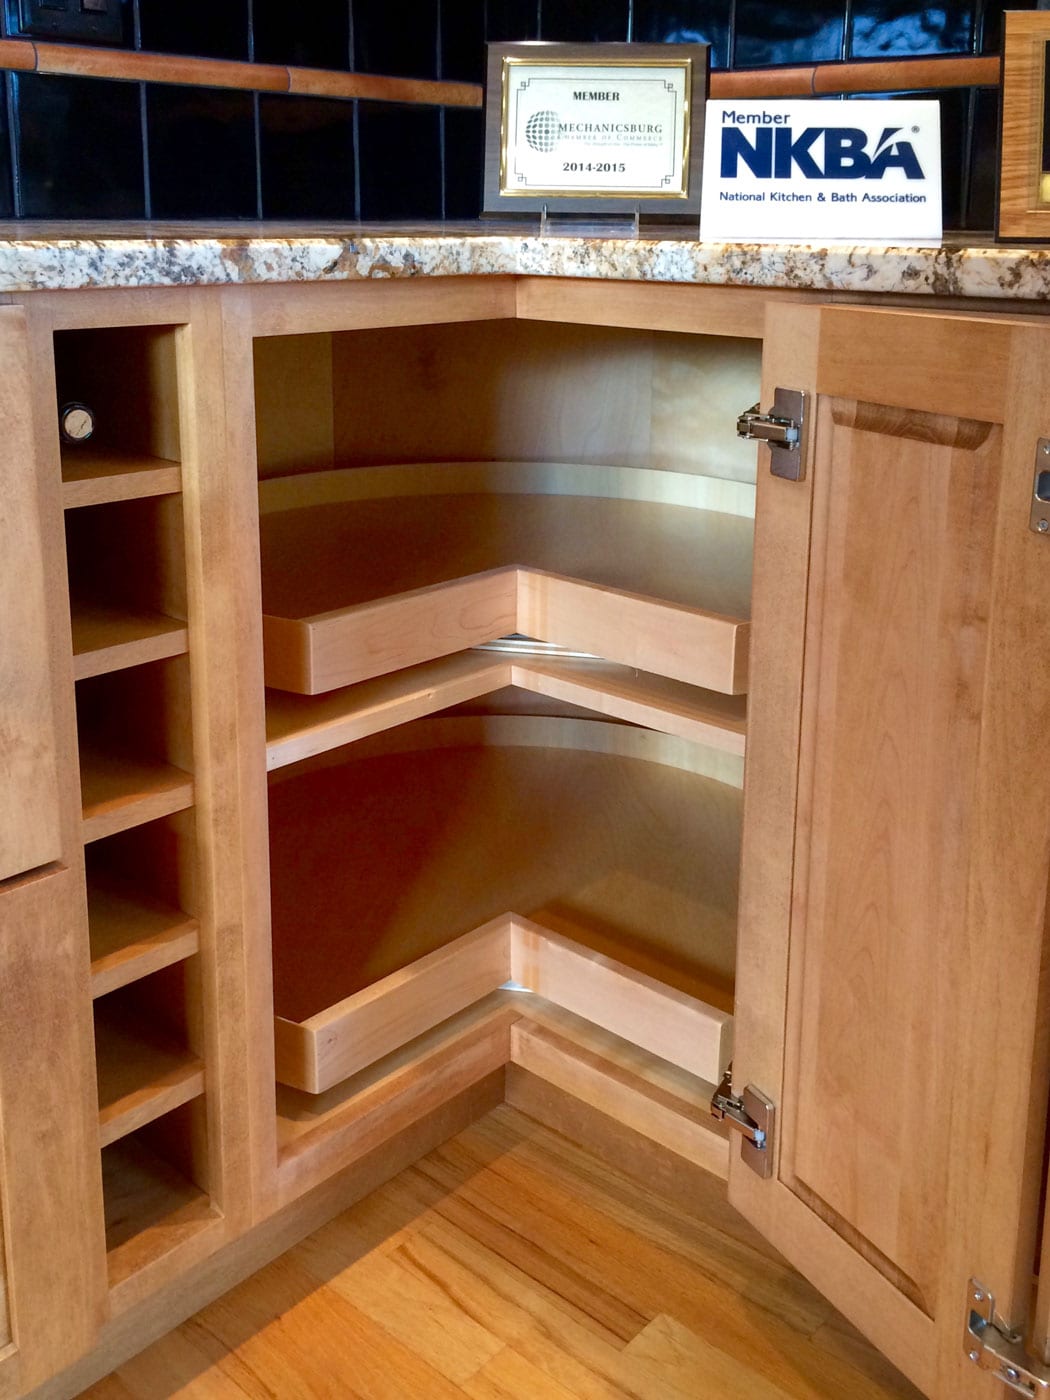 5 Solutions For Your Kitchen Corner Cabinet Storage Needs.
